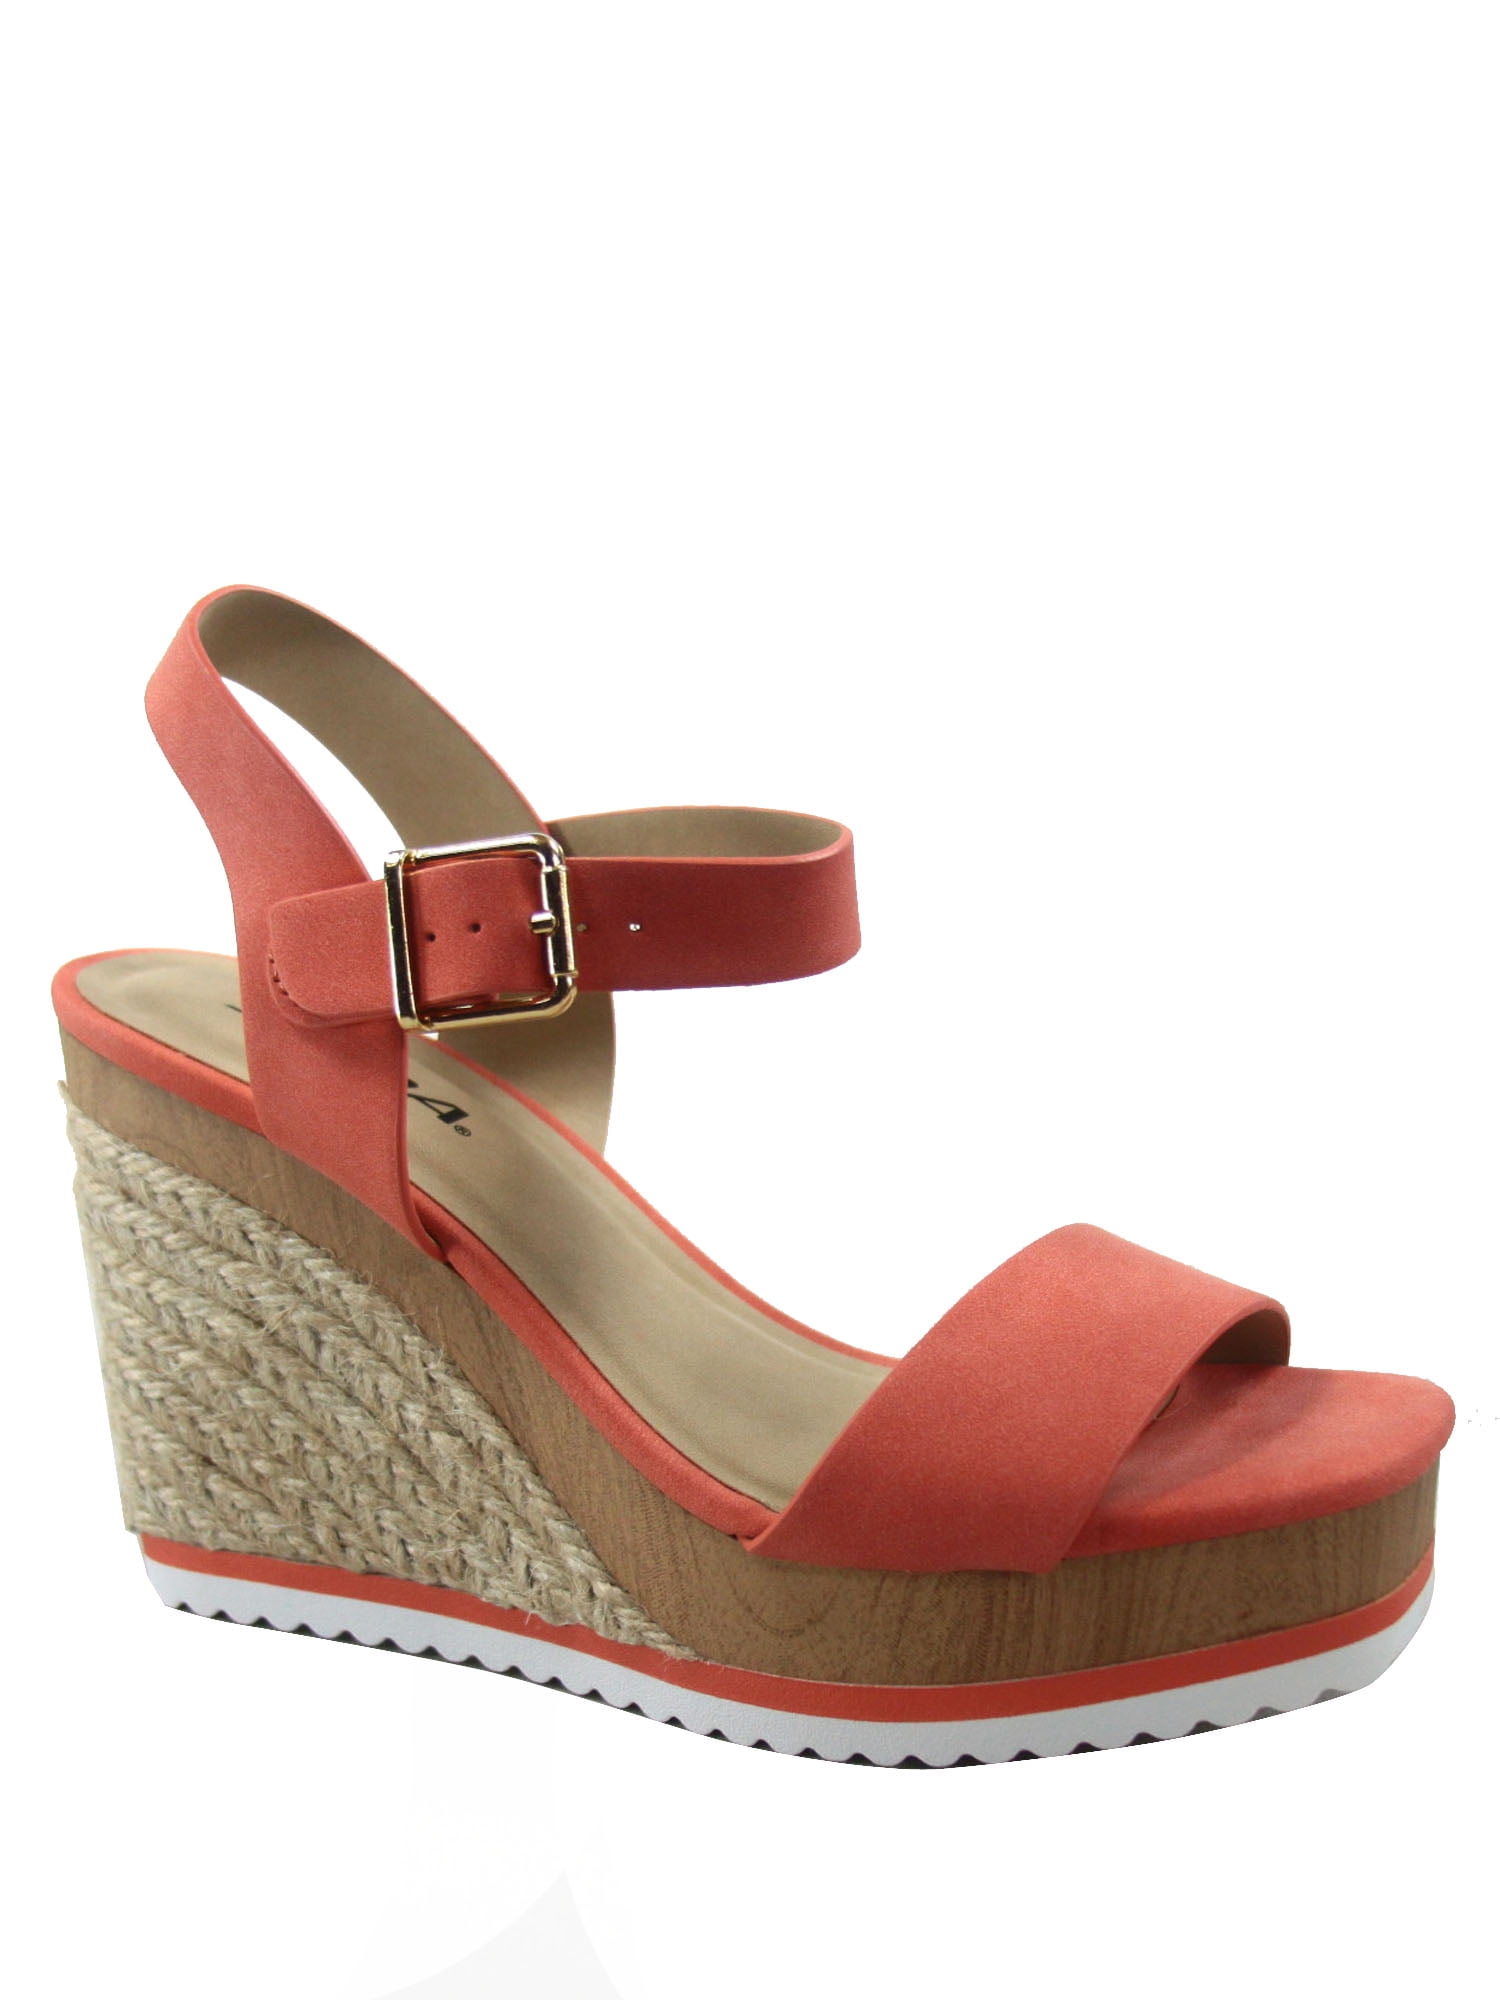 Issue-s Casual Espadrilles Jute with Woods Open Toe Buckle Ankle Strap ...